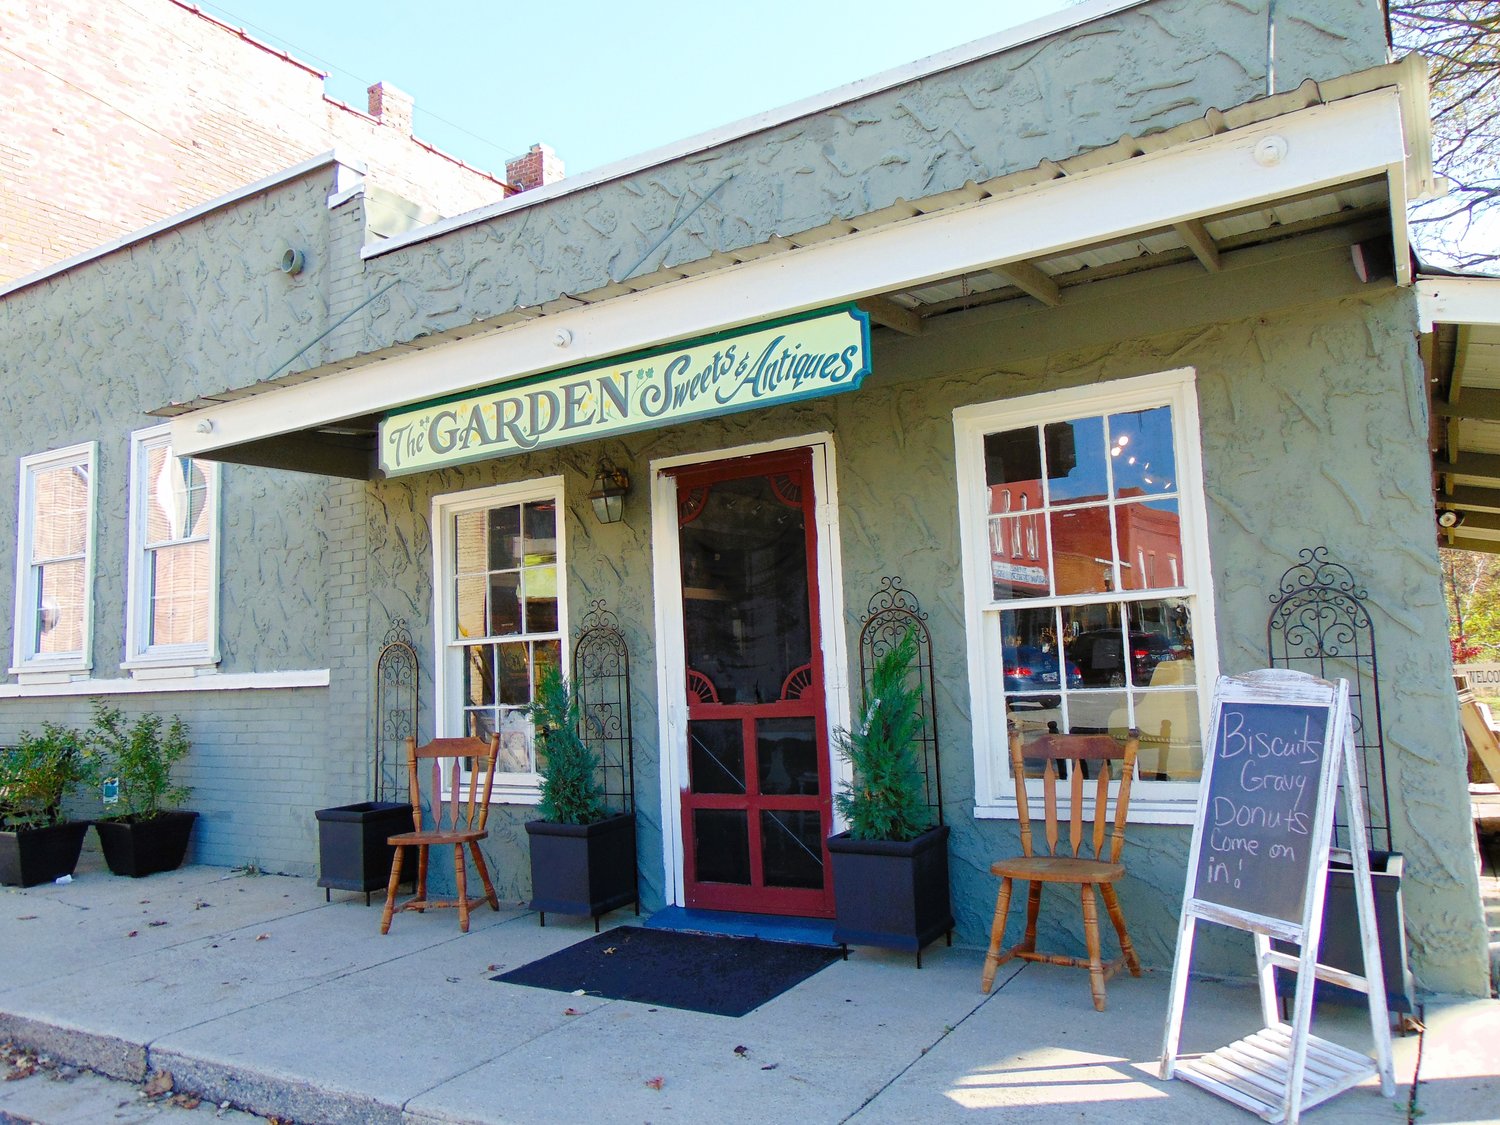 Chabbi’s is located in The Garden at 98 E Main Street in Wartrace.